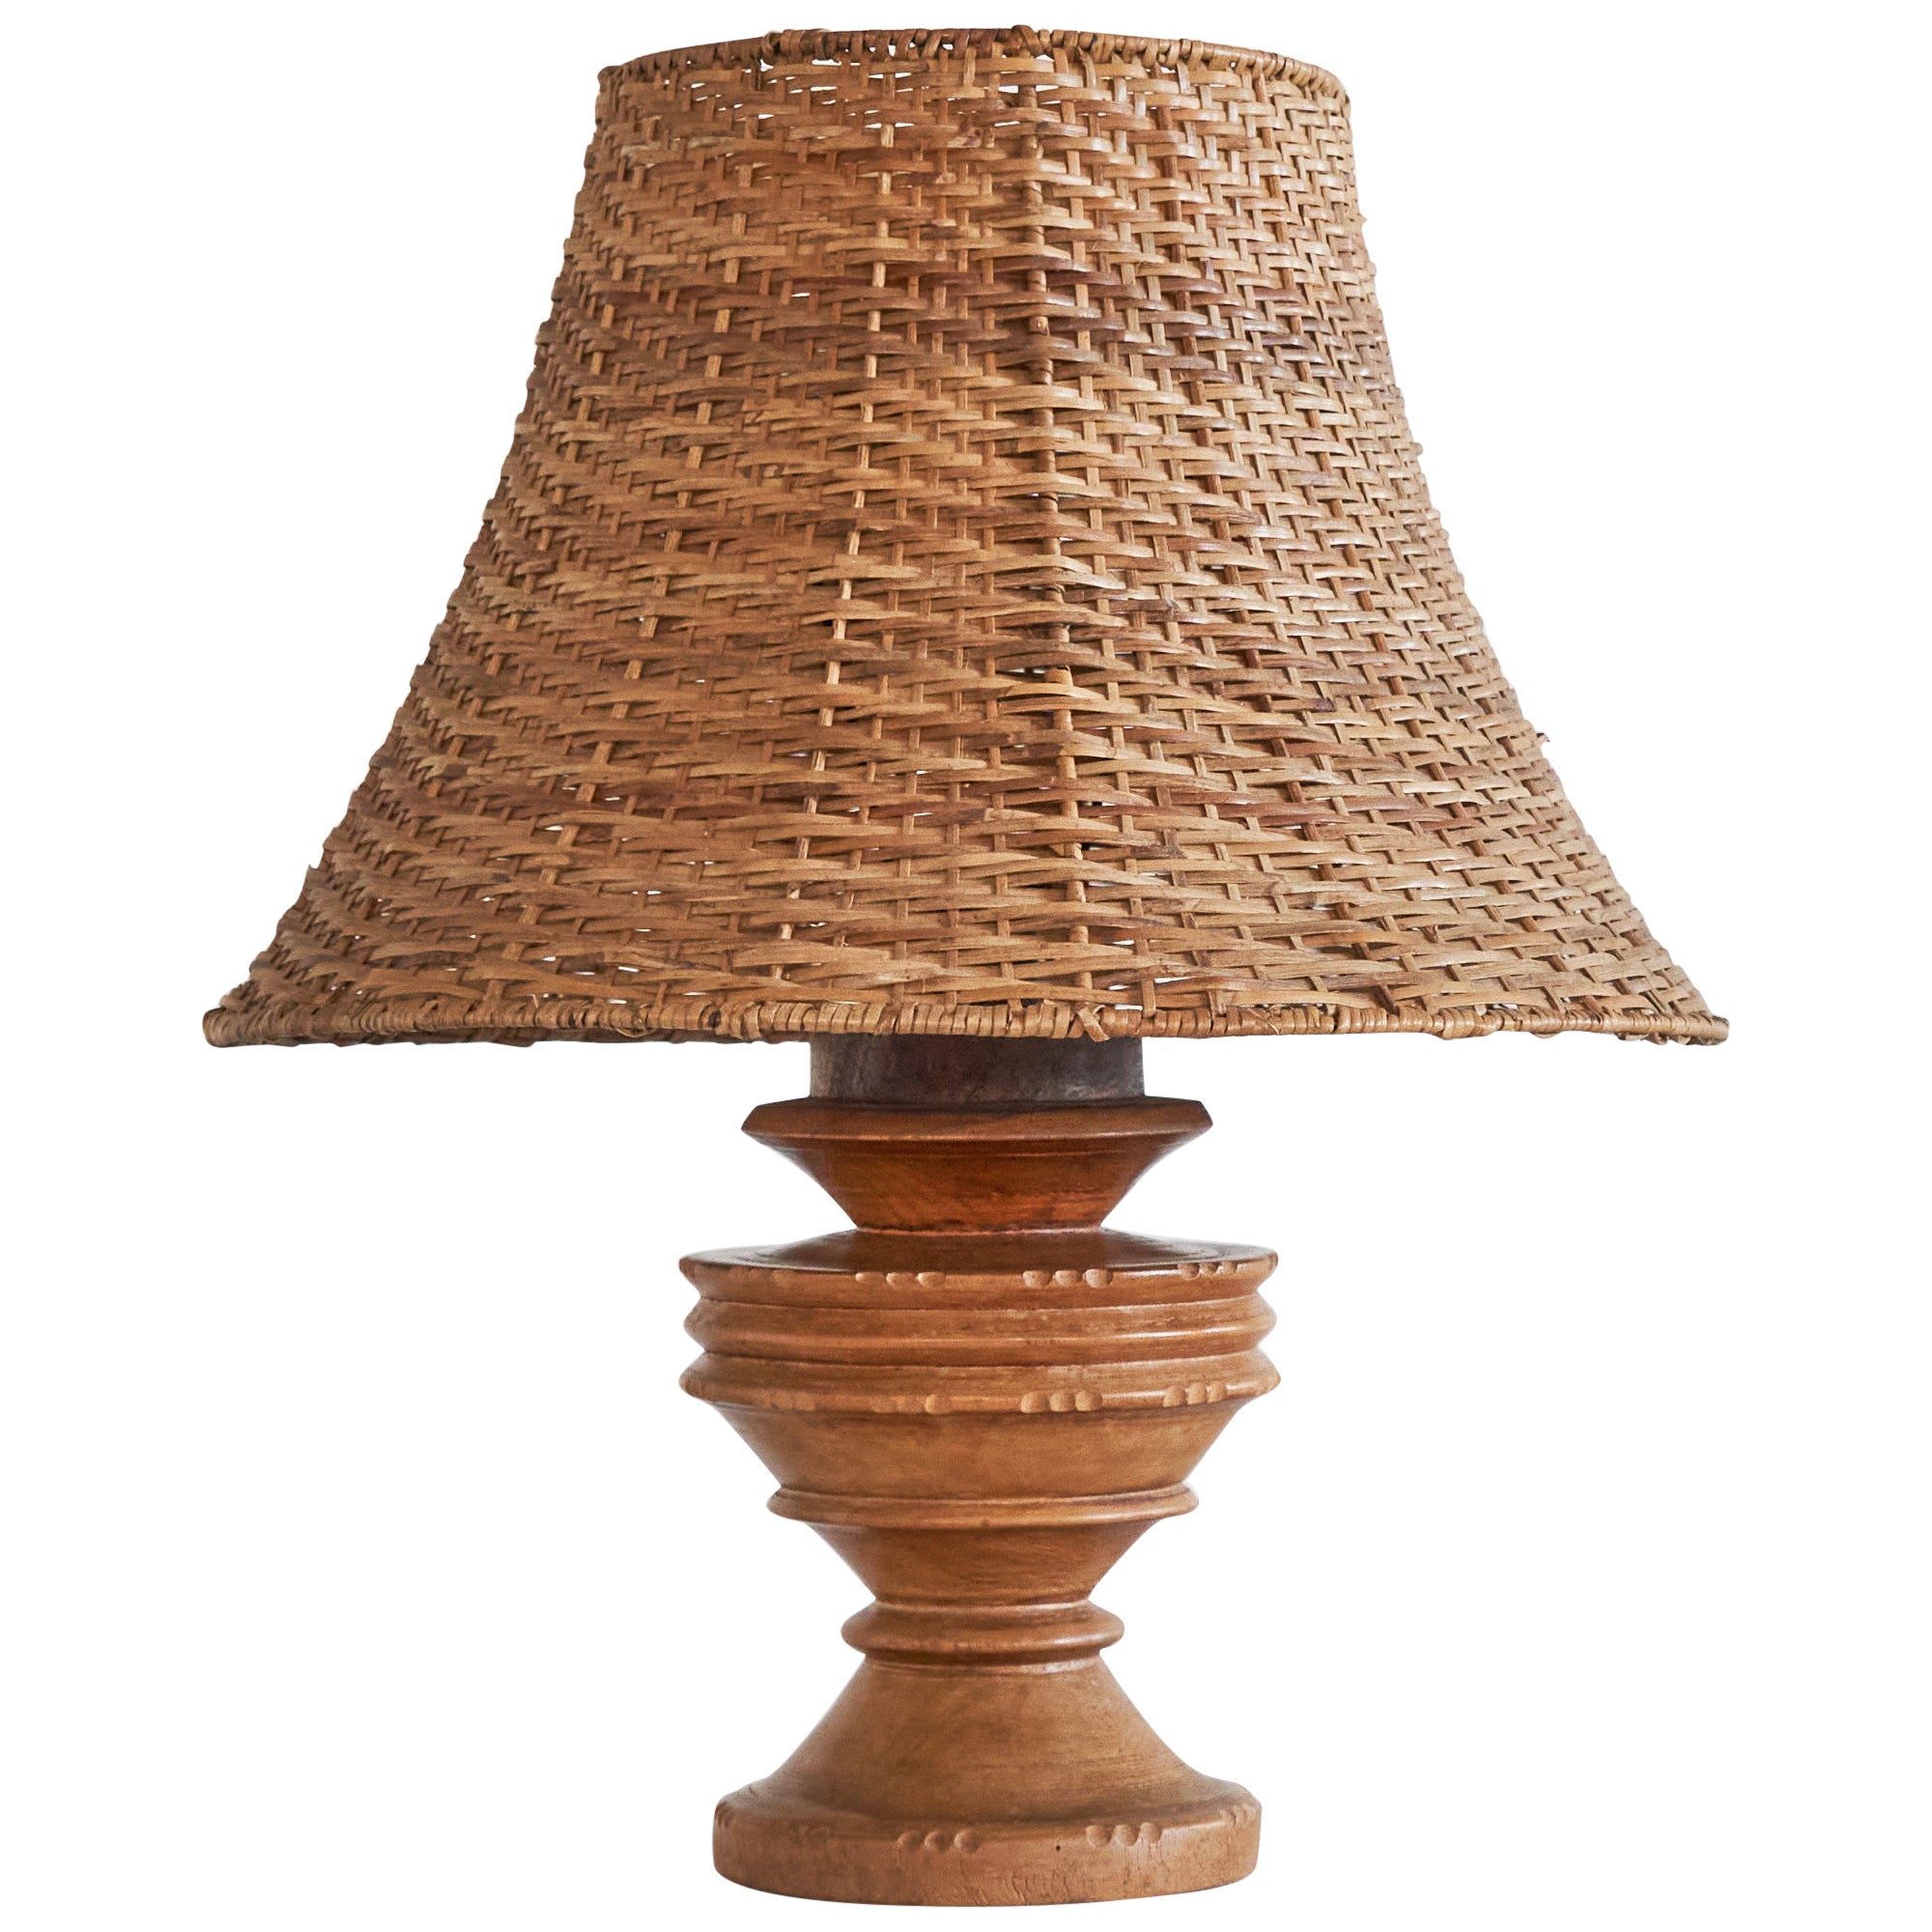 Wabi Sabi Antique Table Lamp in Turned and Carved Wood with Rattan Shade For Sale